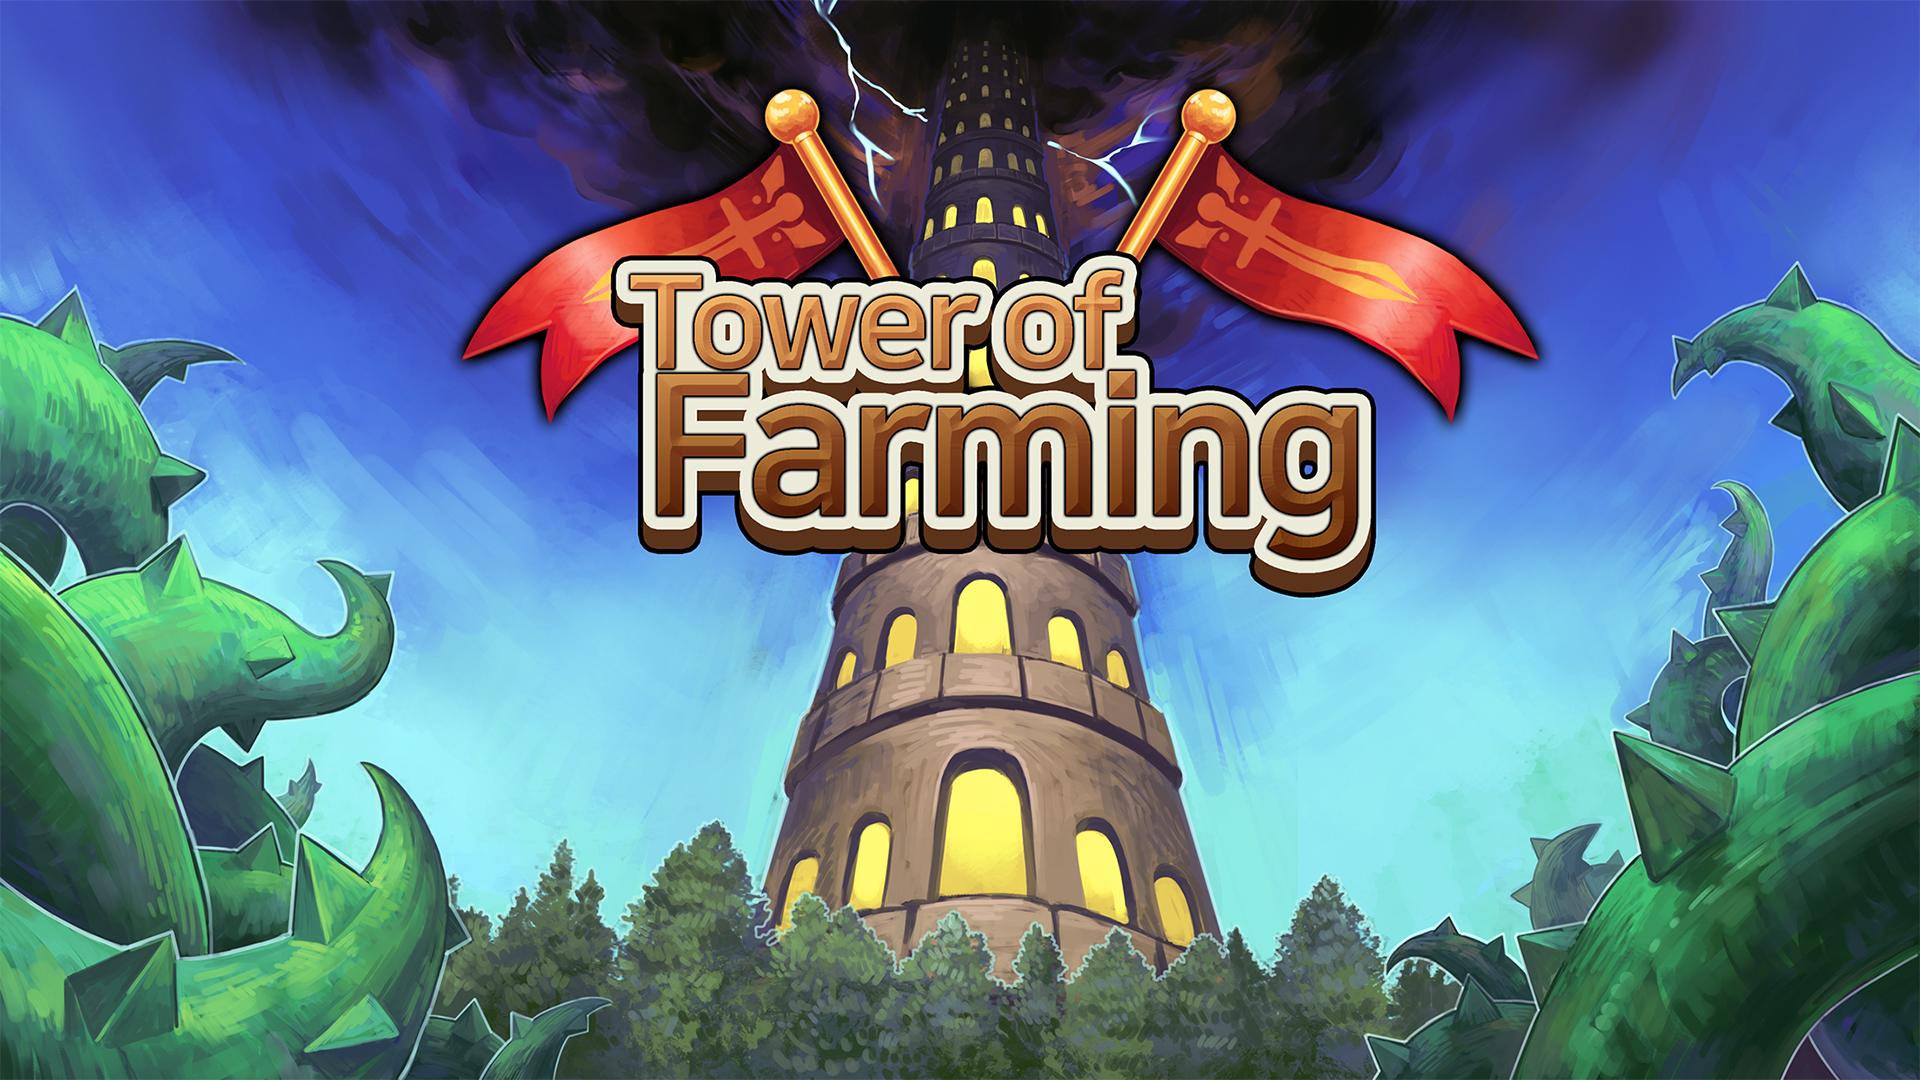 Tower of Farming - idle RPG (Ticket Event) screenshot 1